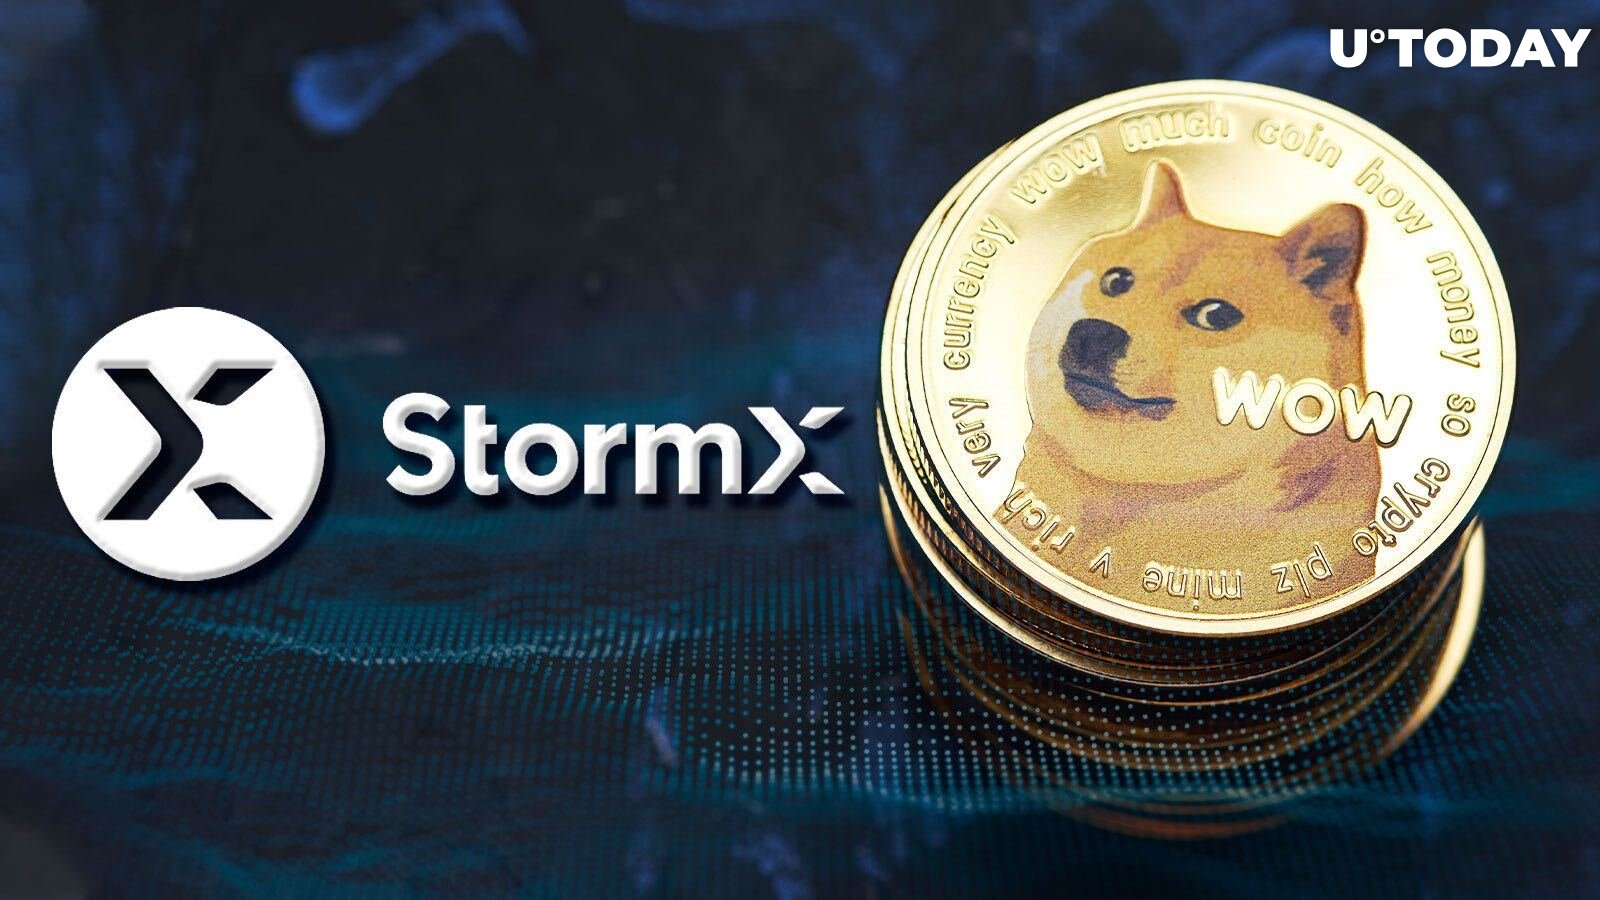 DOGE to Be Added to StormX, Dogecoin Co-founder Happy to Respond